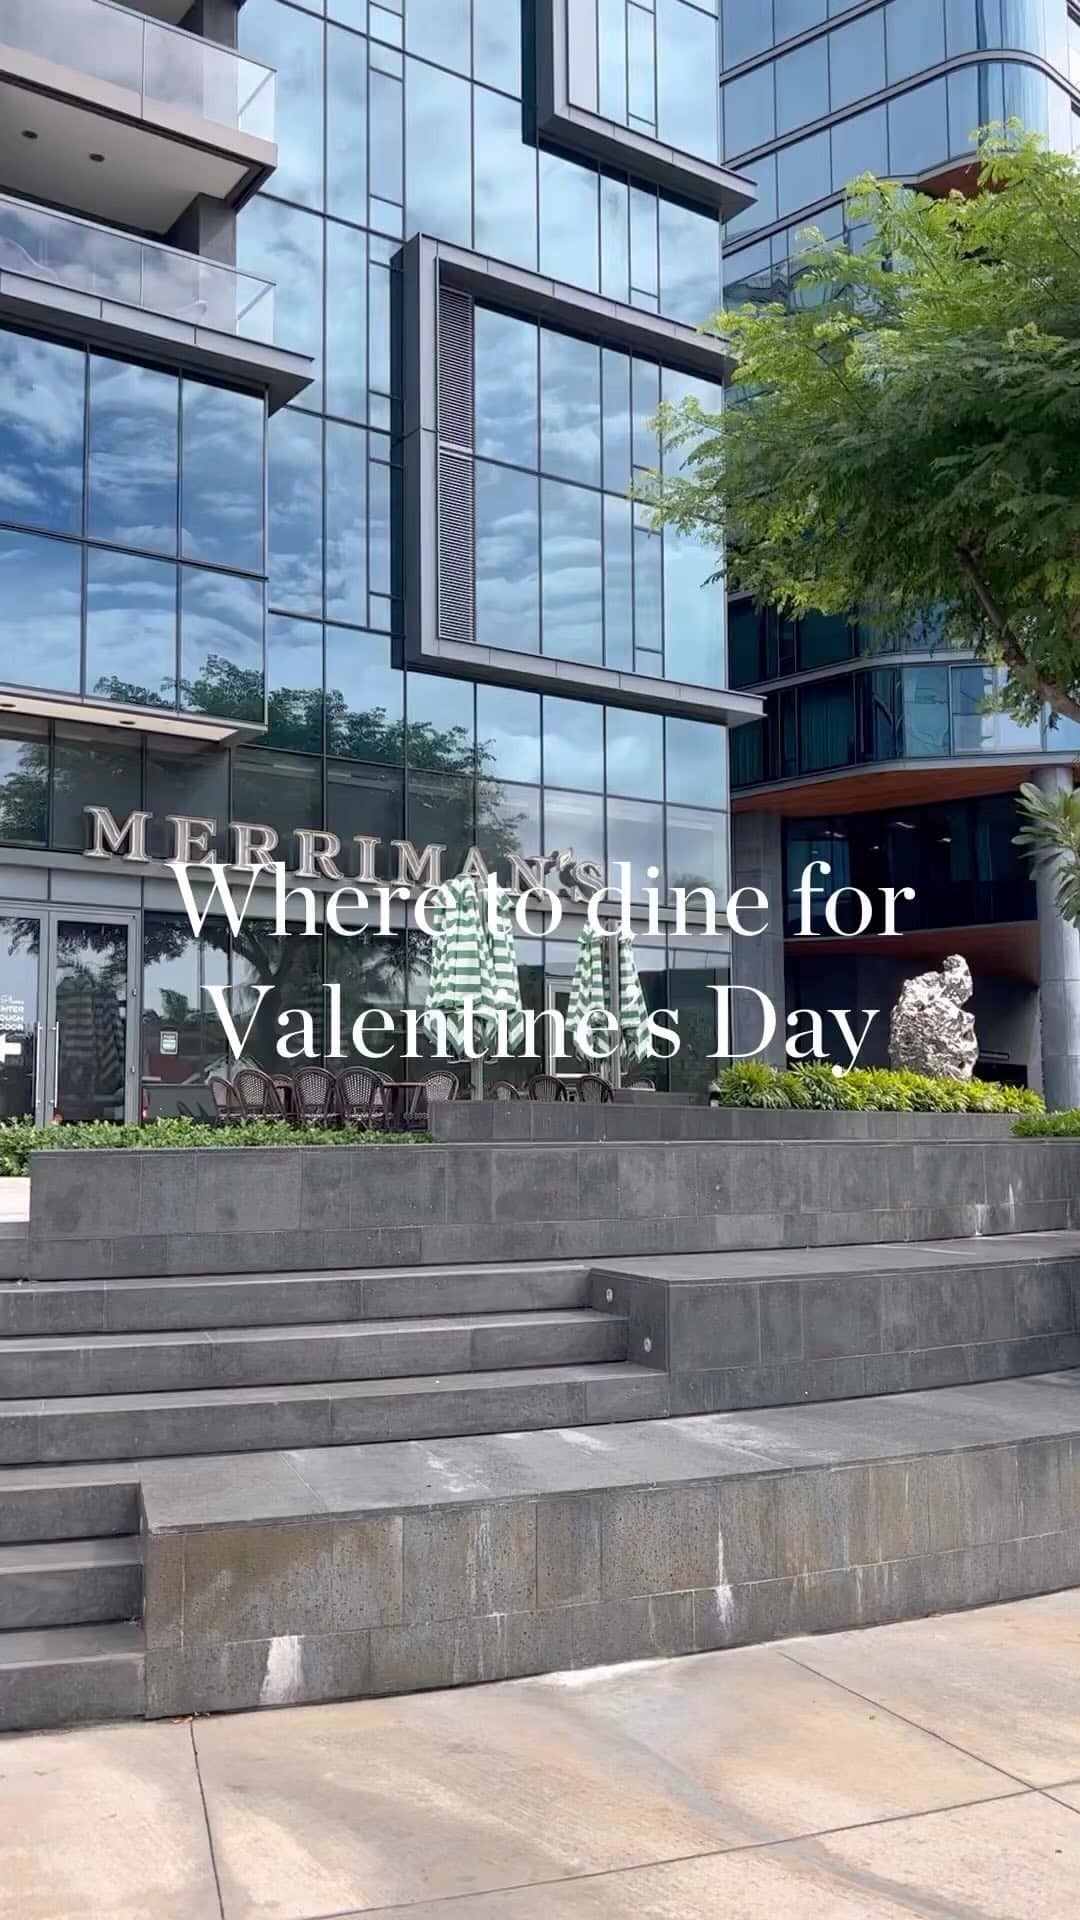 Celebrate Valentine’s Day at Ward Village! 

Make reservations today and treat yourself and your loved ones to something special. Click the link in our bio to discover a full list of neighborhood eateries.